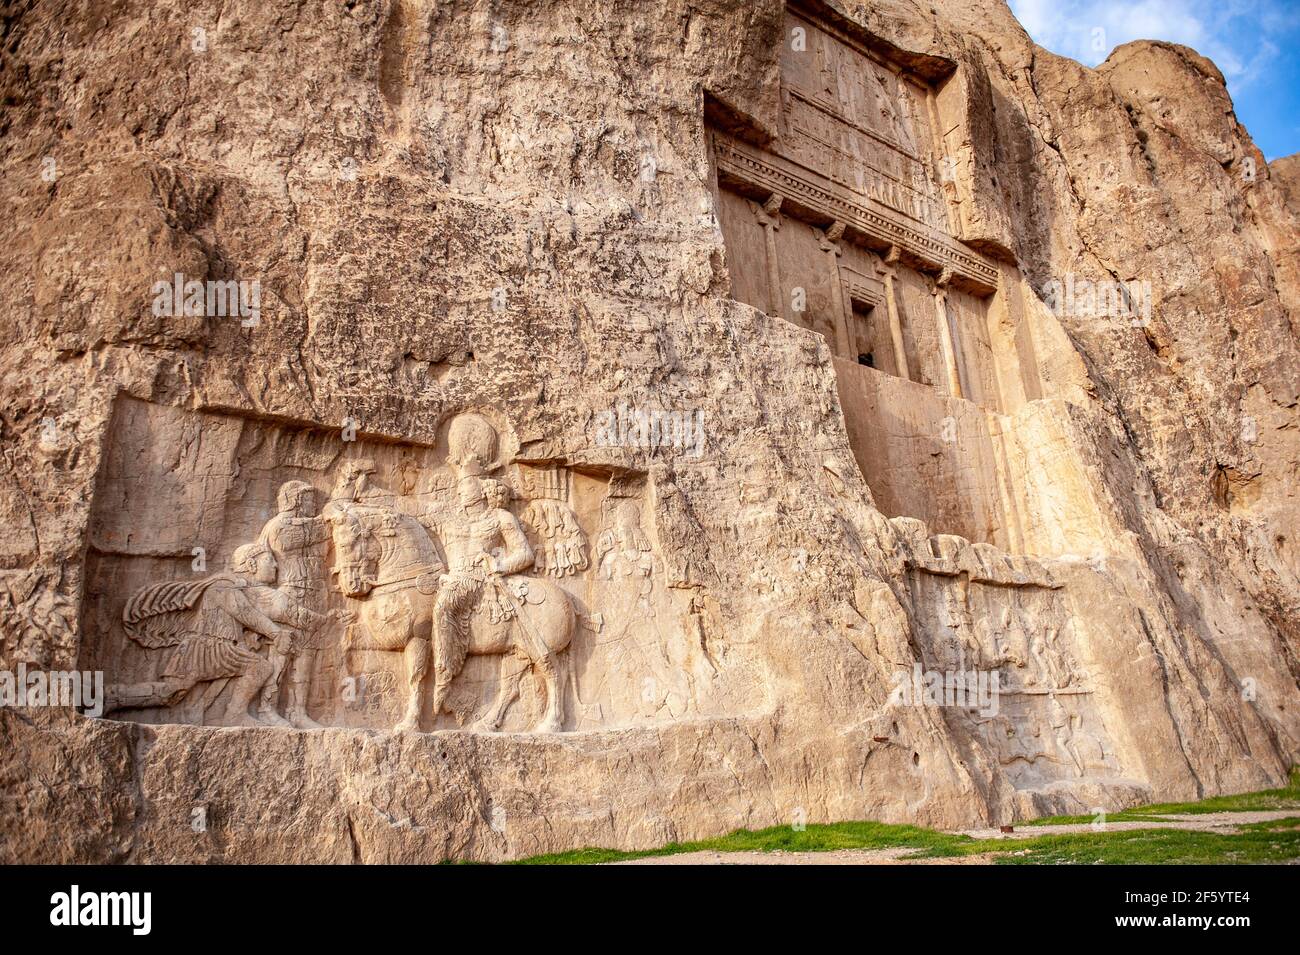 Tomb of the King of Kigns Darius the Great, ruler of the Achaemenid empire, located in Naqsh-e Rostam necropolis in Iran Stock Photo